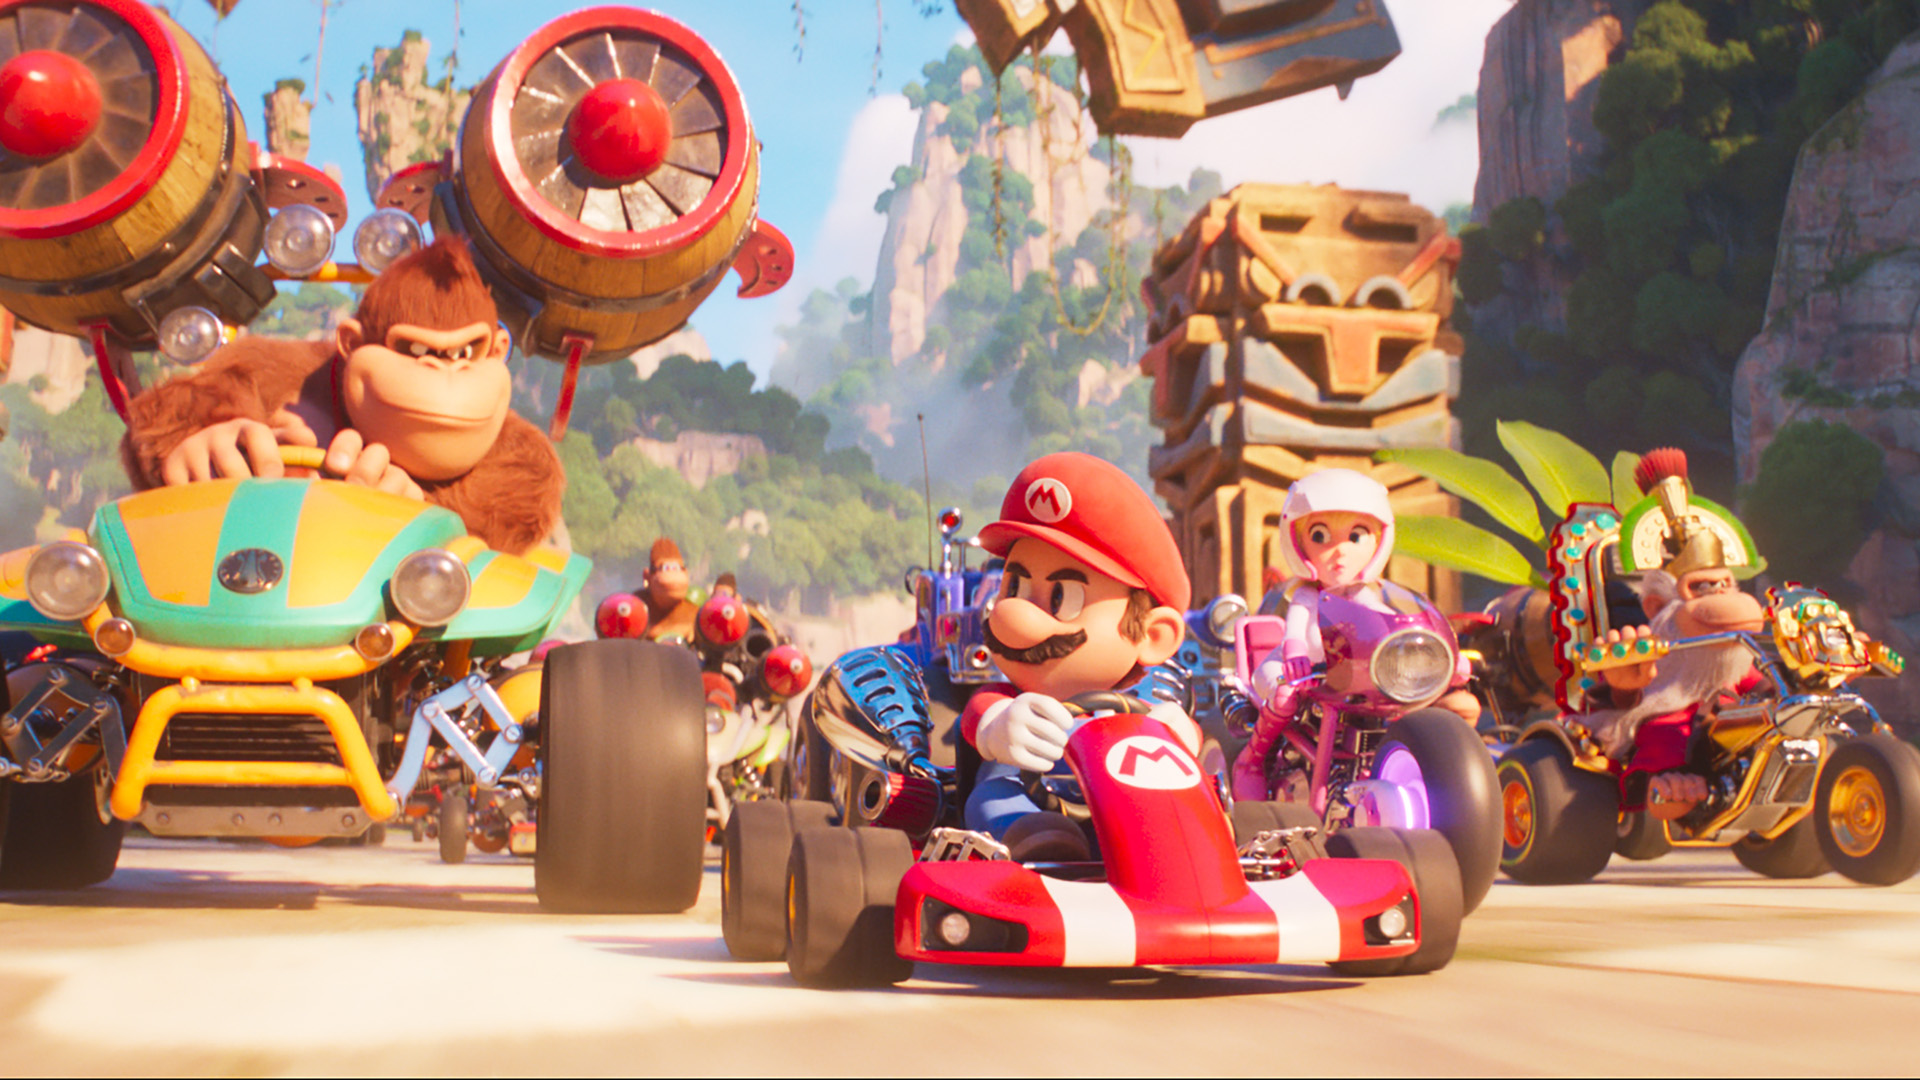 Mario, Peach, Donkey Kong, Toad and Kranky Kong drive their karts in the Super Mario Bros. movie.